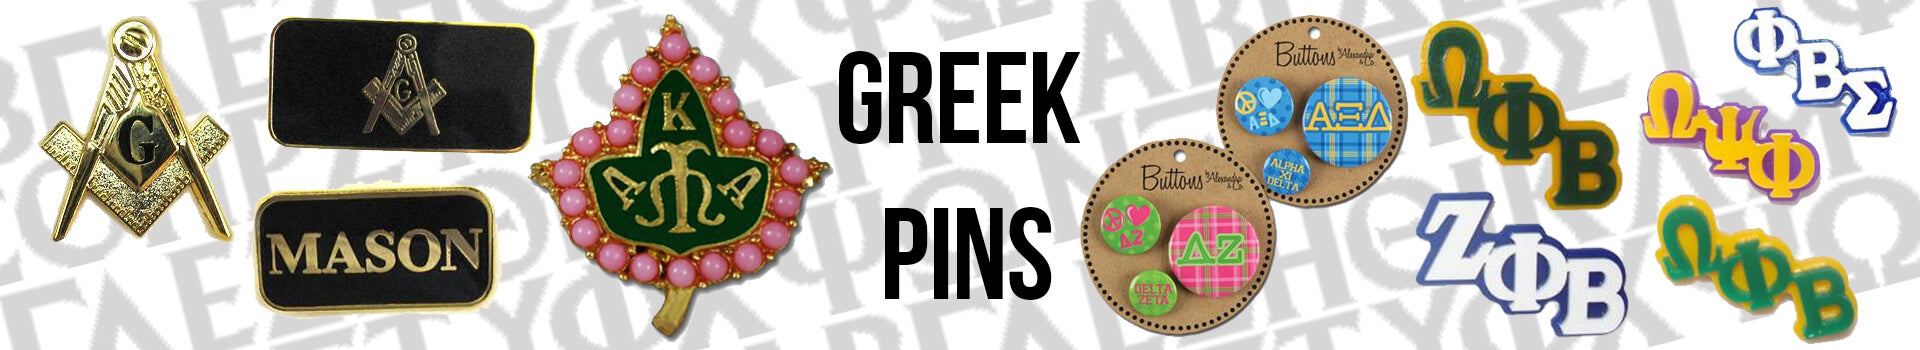 Custom Fraternity and Sorority Greek Letter Pins - Greek Jewelry and Accessories